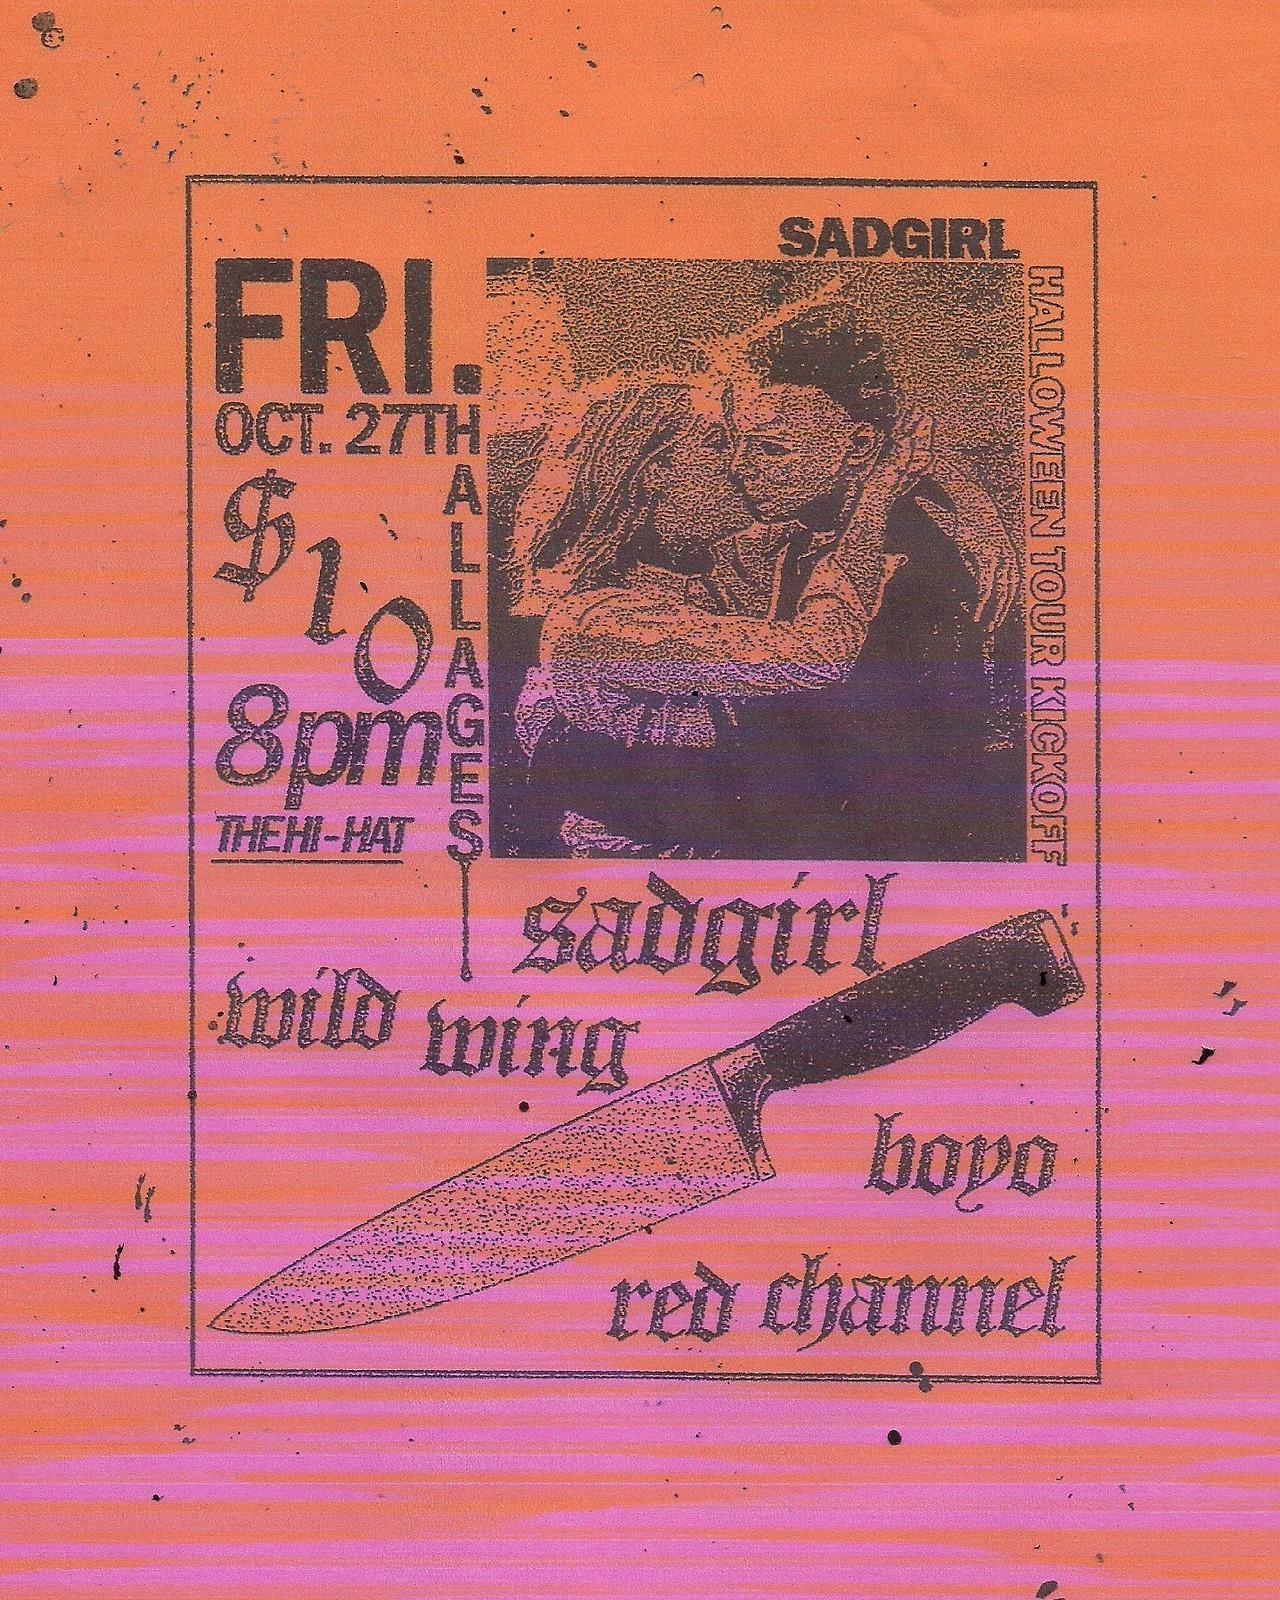 Sadgirl Friday Oct 27th We Playing An Extra Spooky Boi